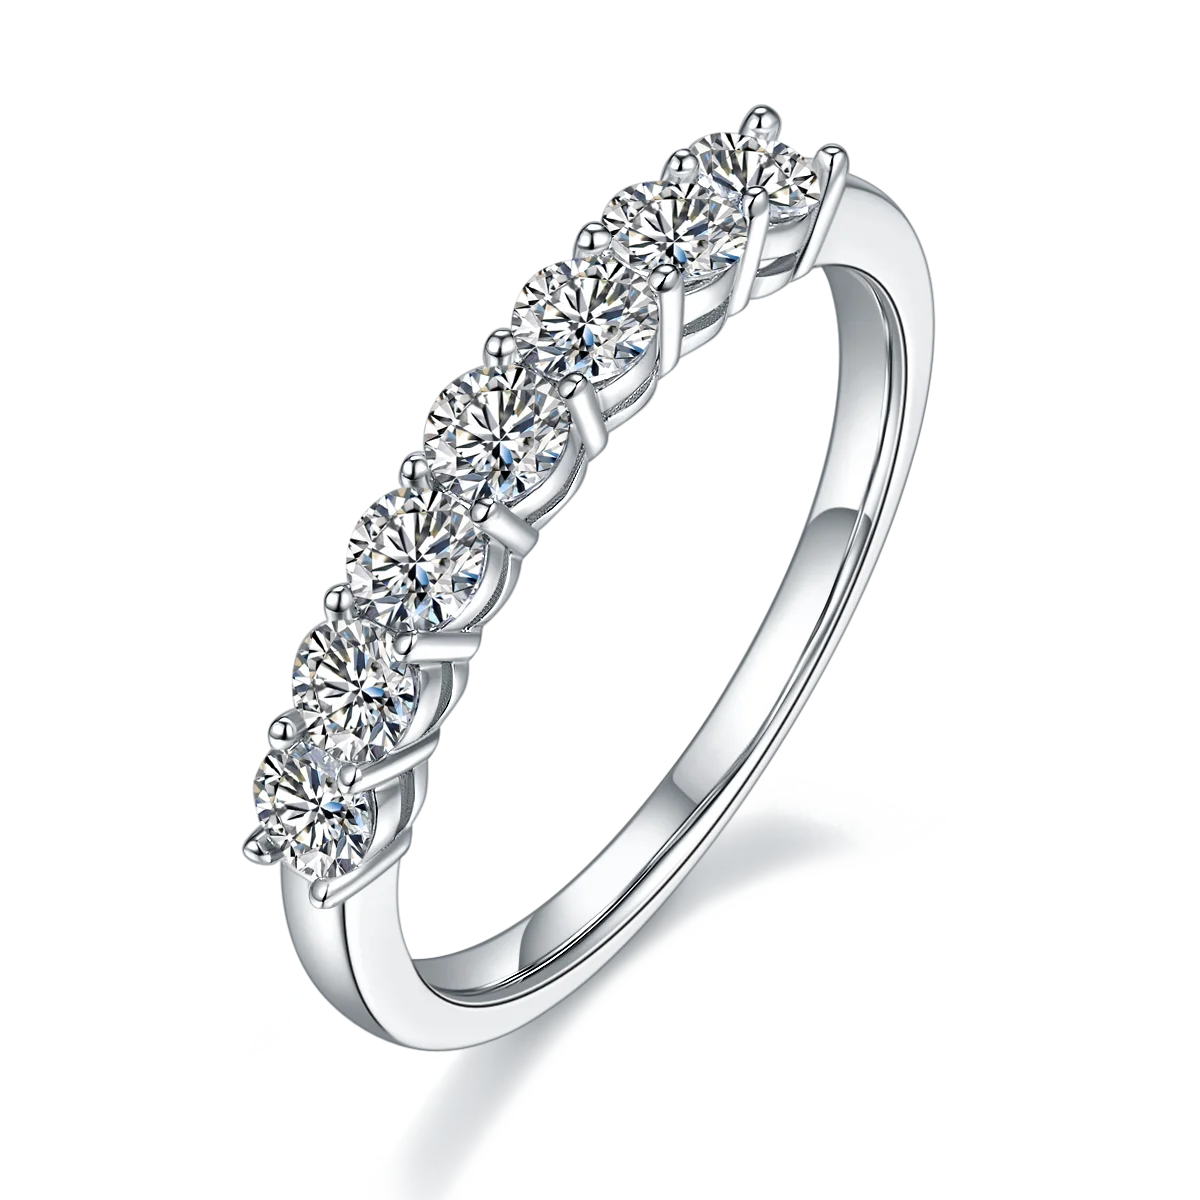 

OEM provided women's 925 sterling silver jewelry rhodium plated classic round luxury engagement circle moissanite ring band